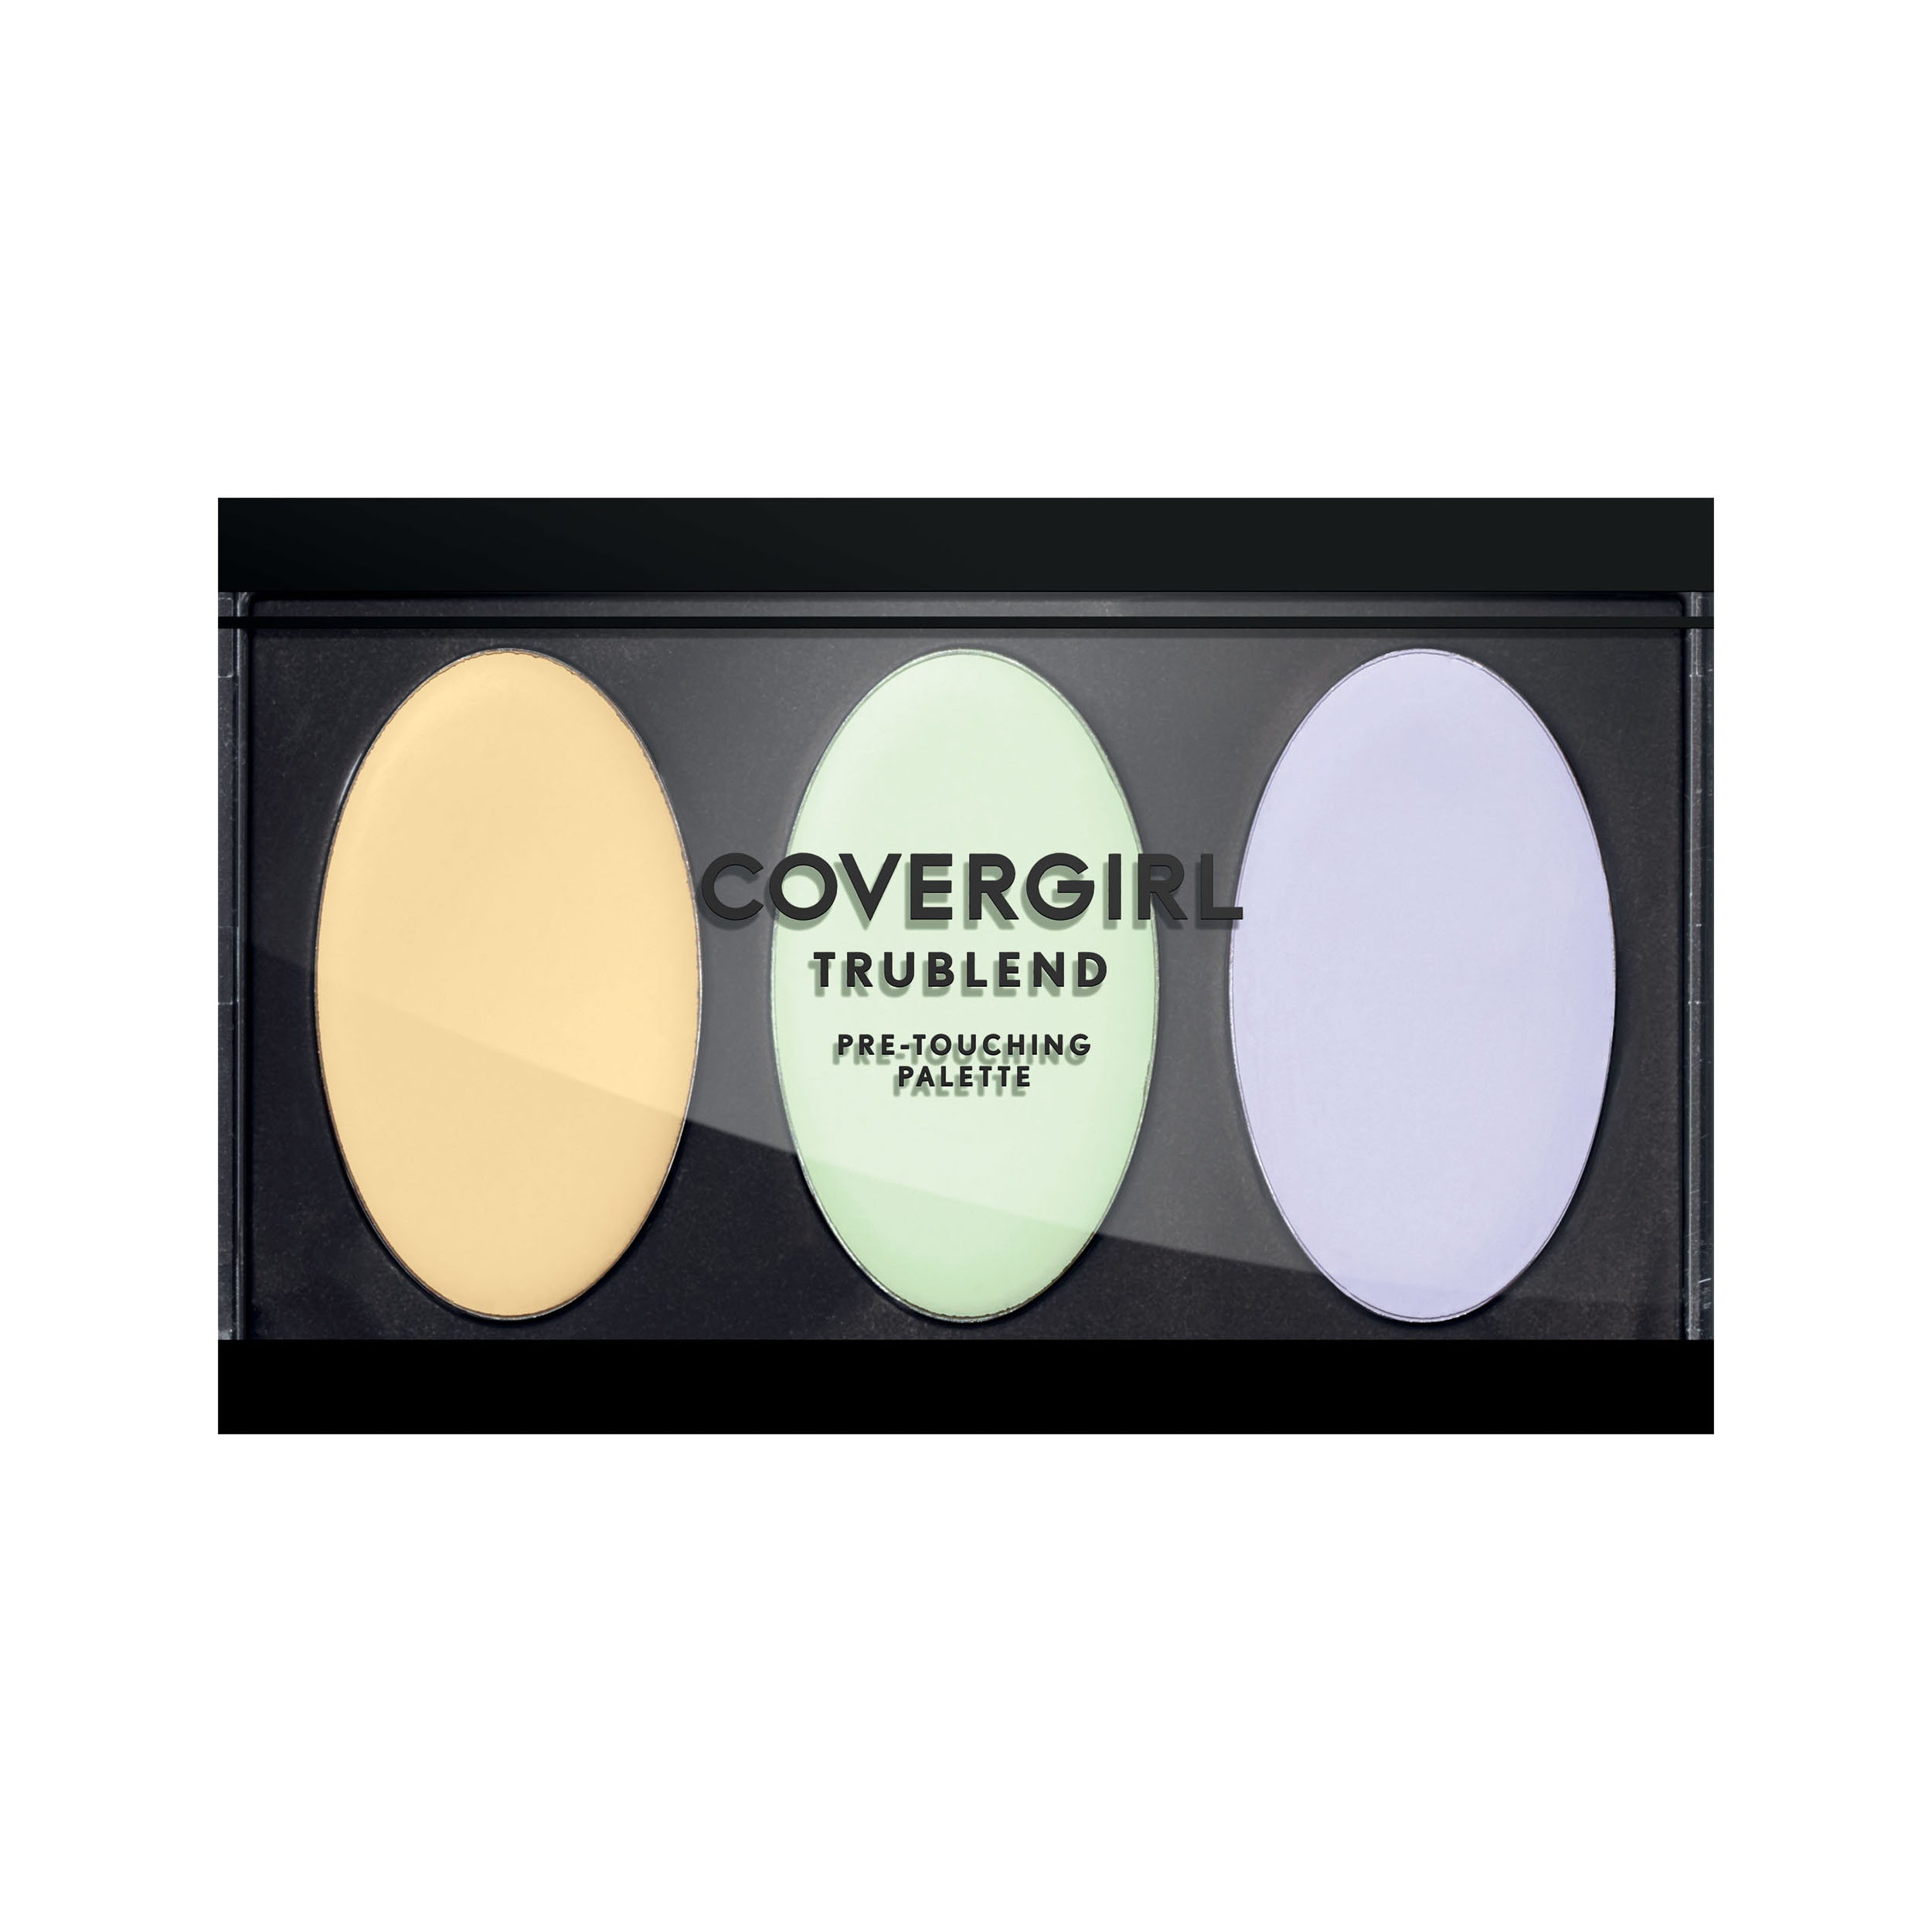 COVERGIRL TruBlend Pre-Touching Color Correcting Palette, 505 Warm - image 1 of 2